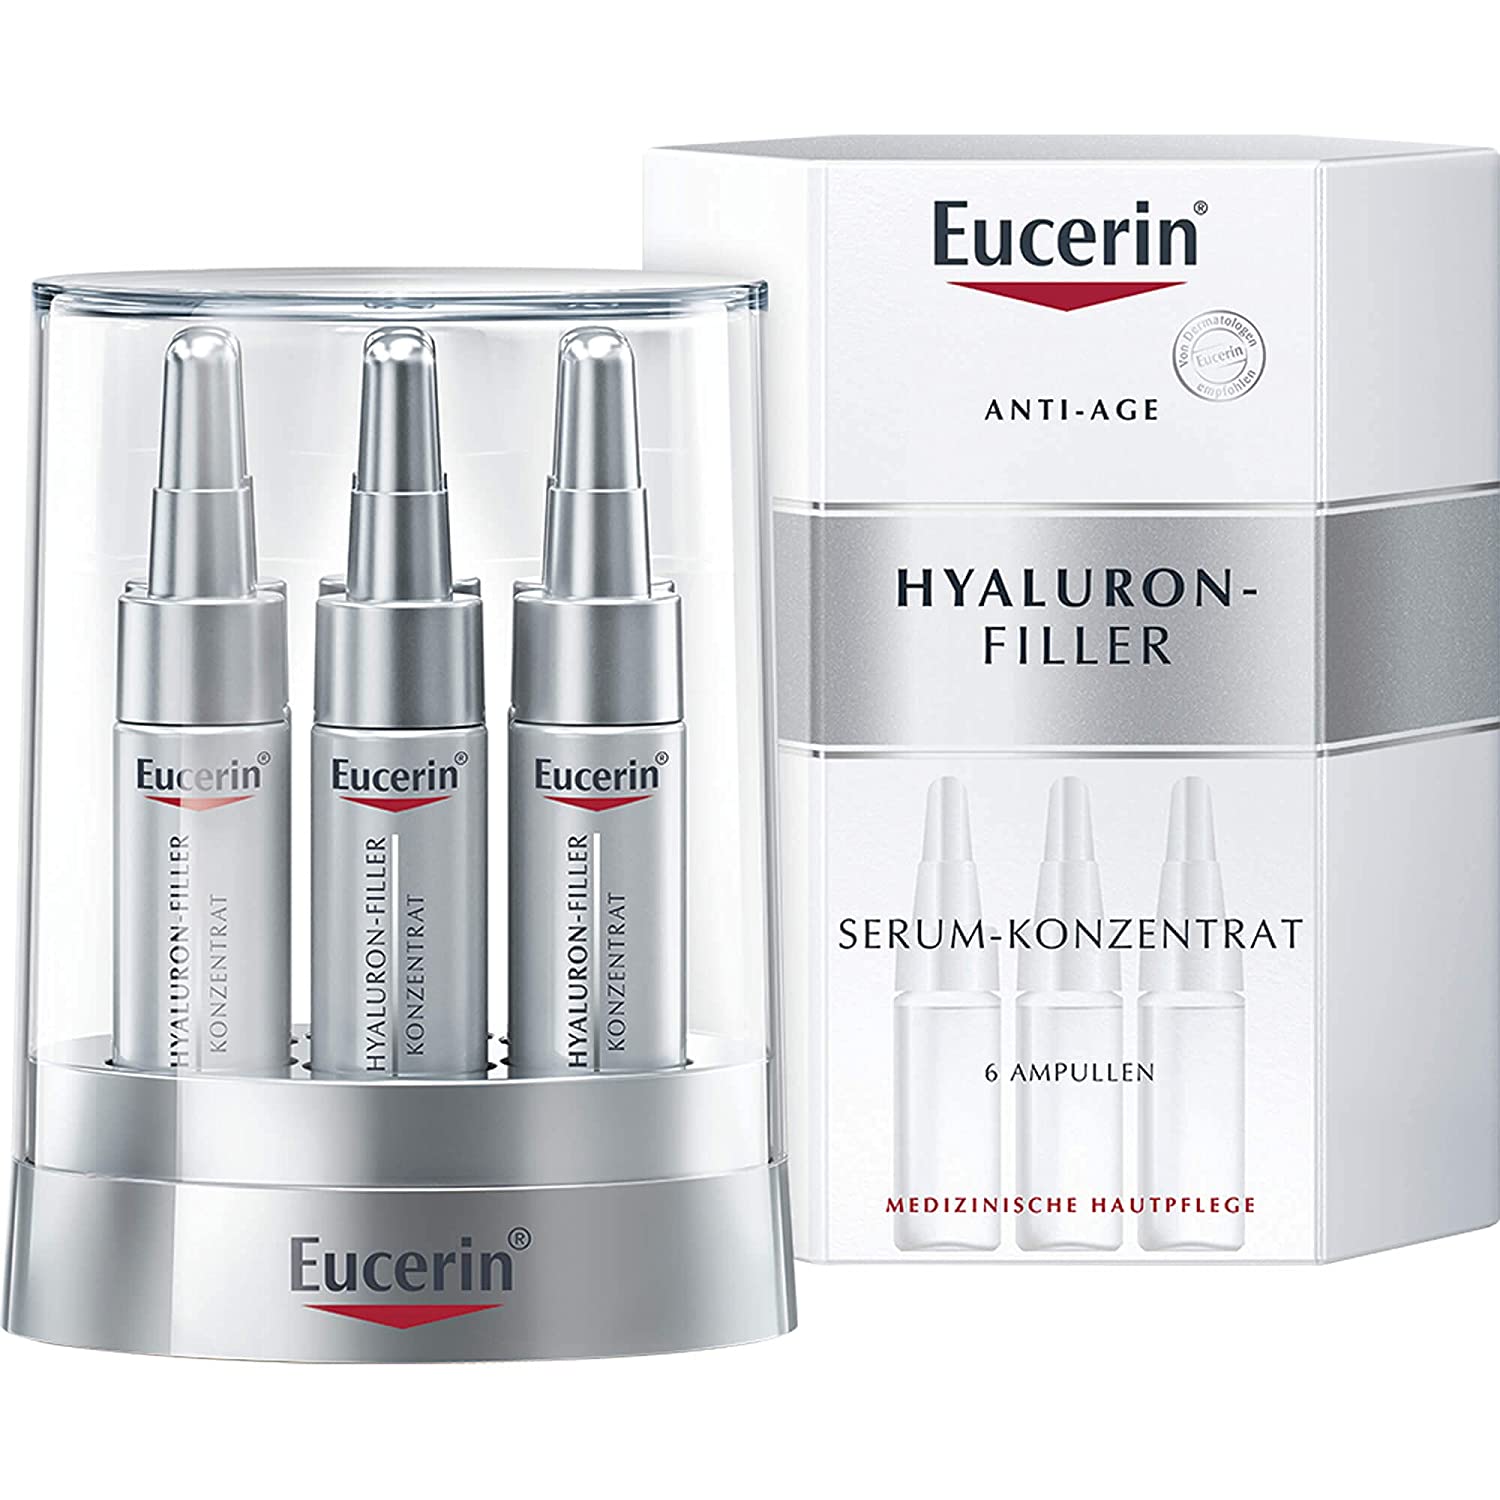 Eucerin Anti-Age Hyaluronic Filler Serum Concentrate Ampoules Pack of 6